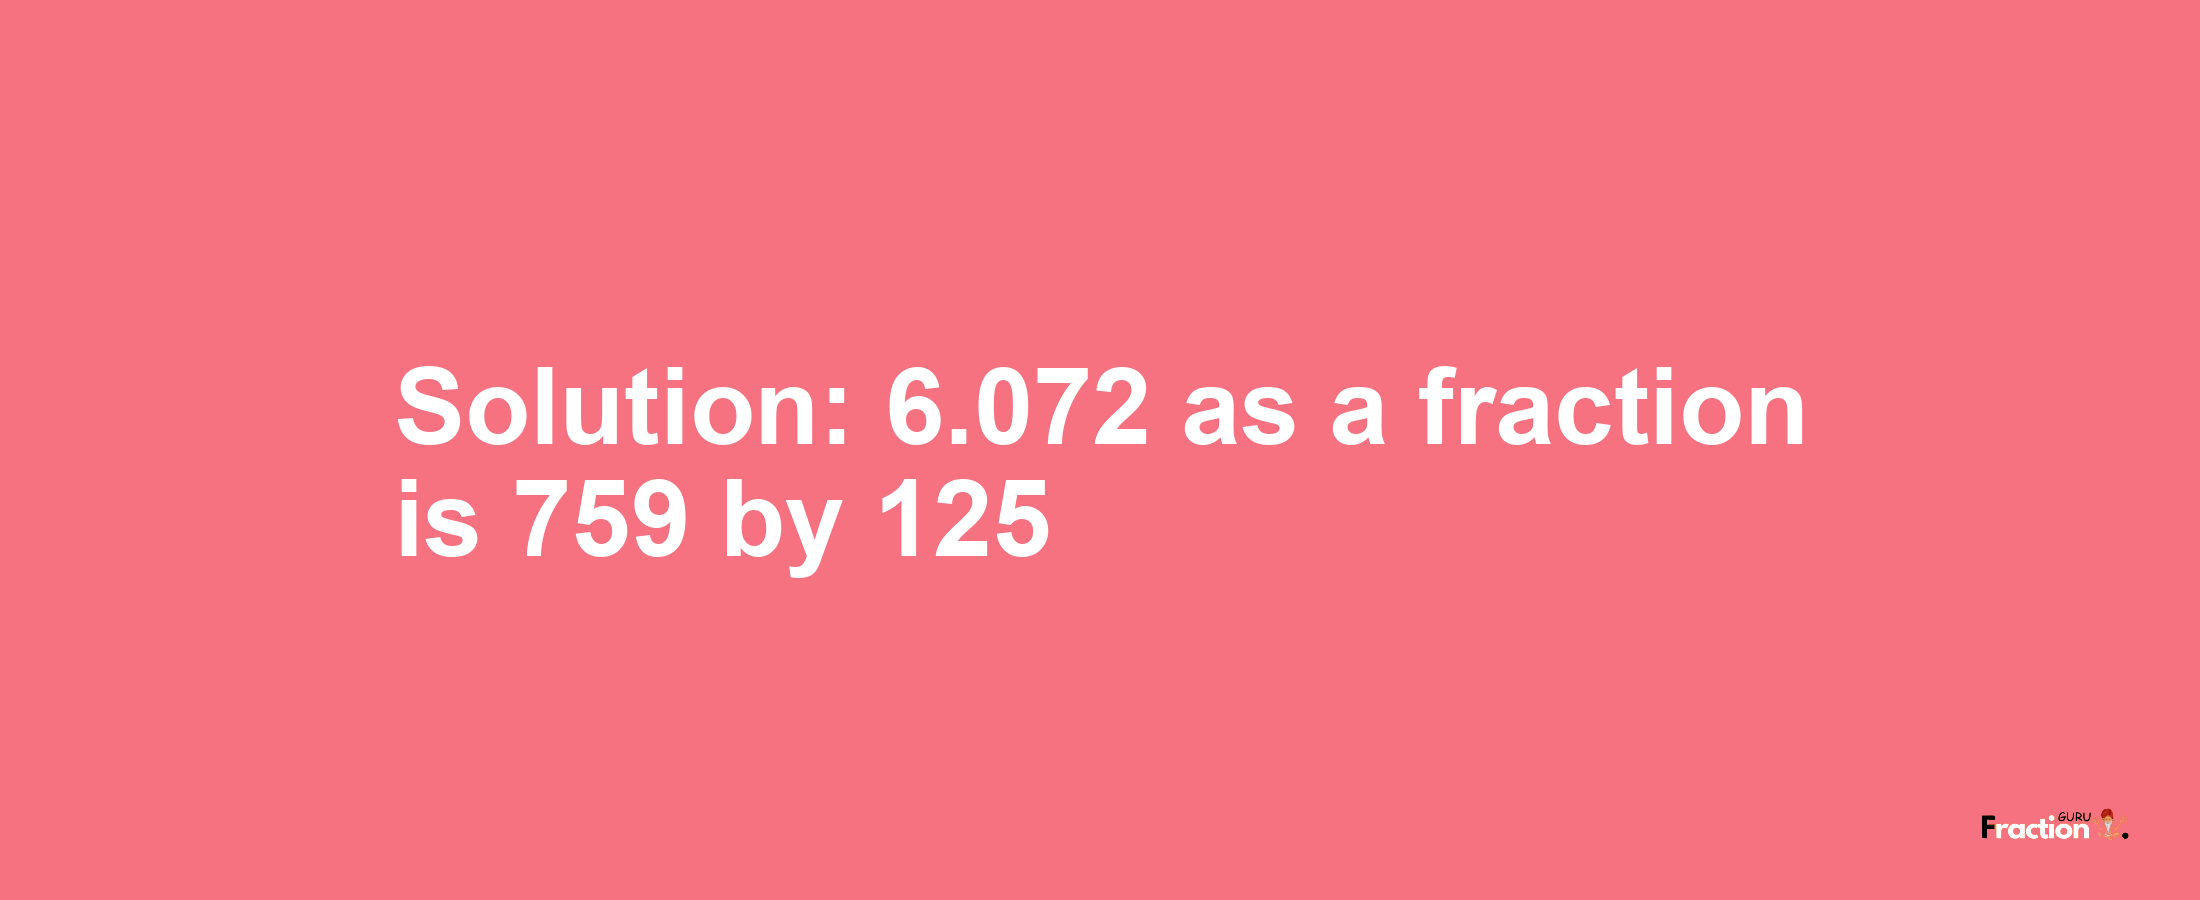 Solution:6.072 as a fraction is 759/125